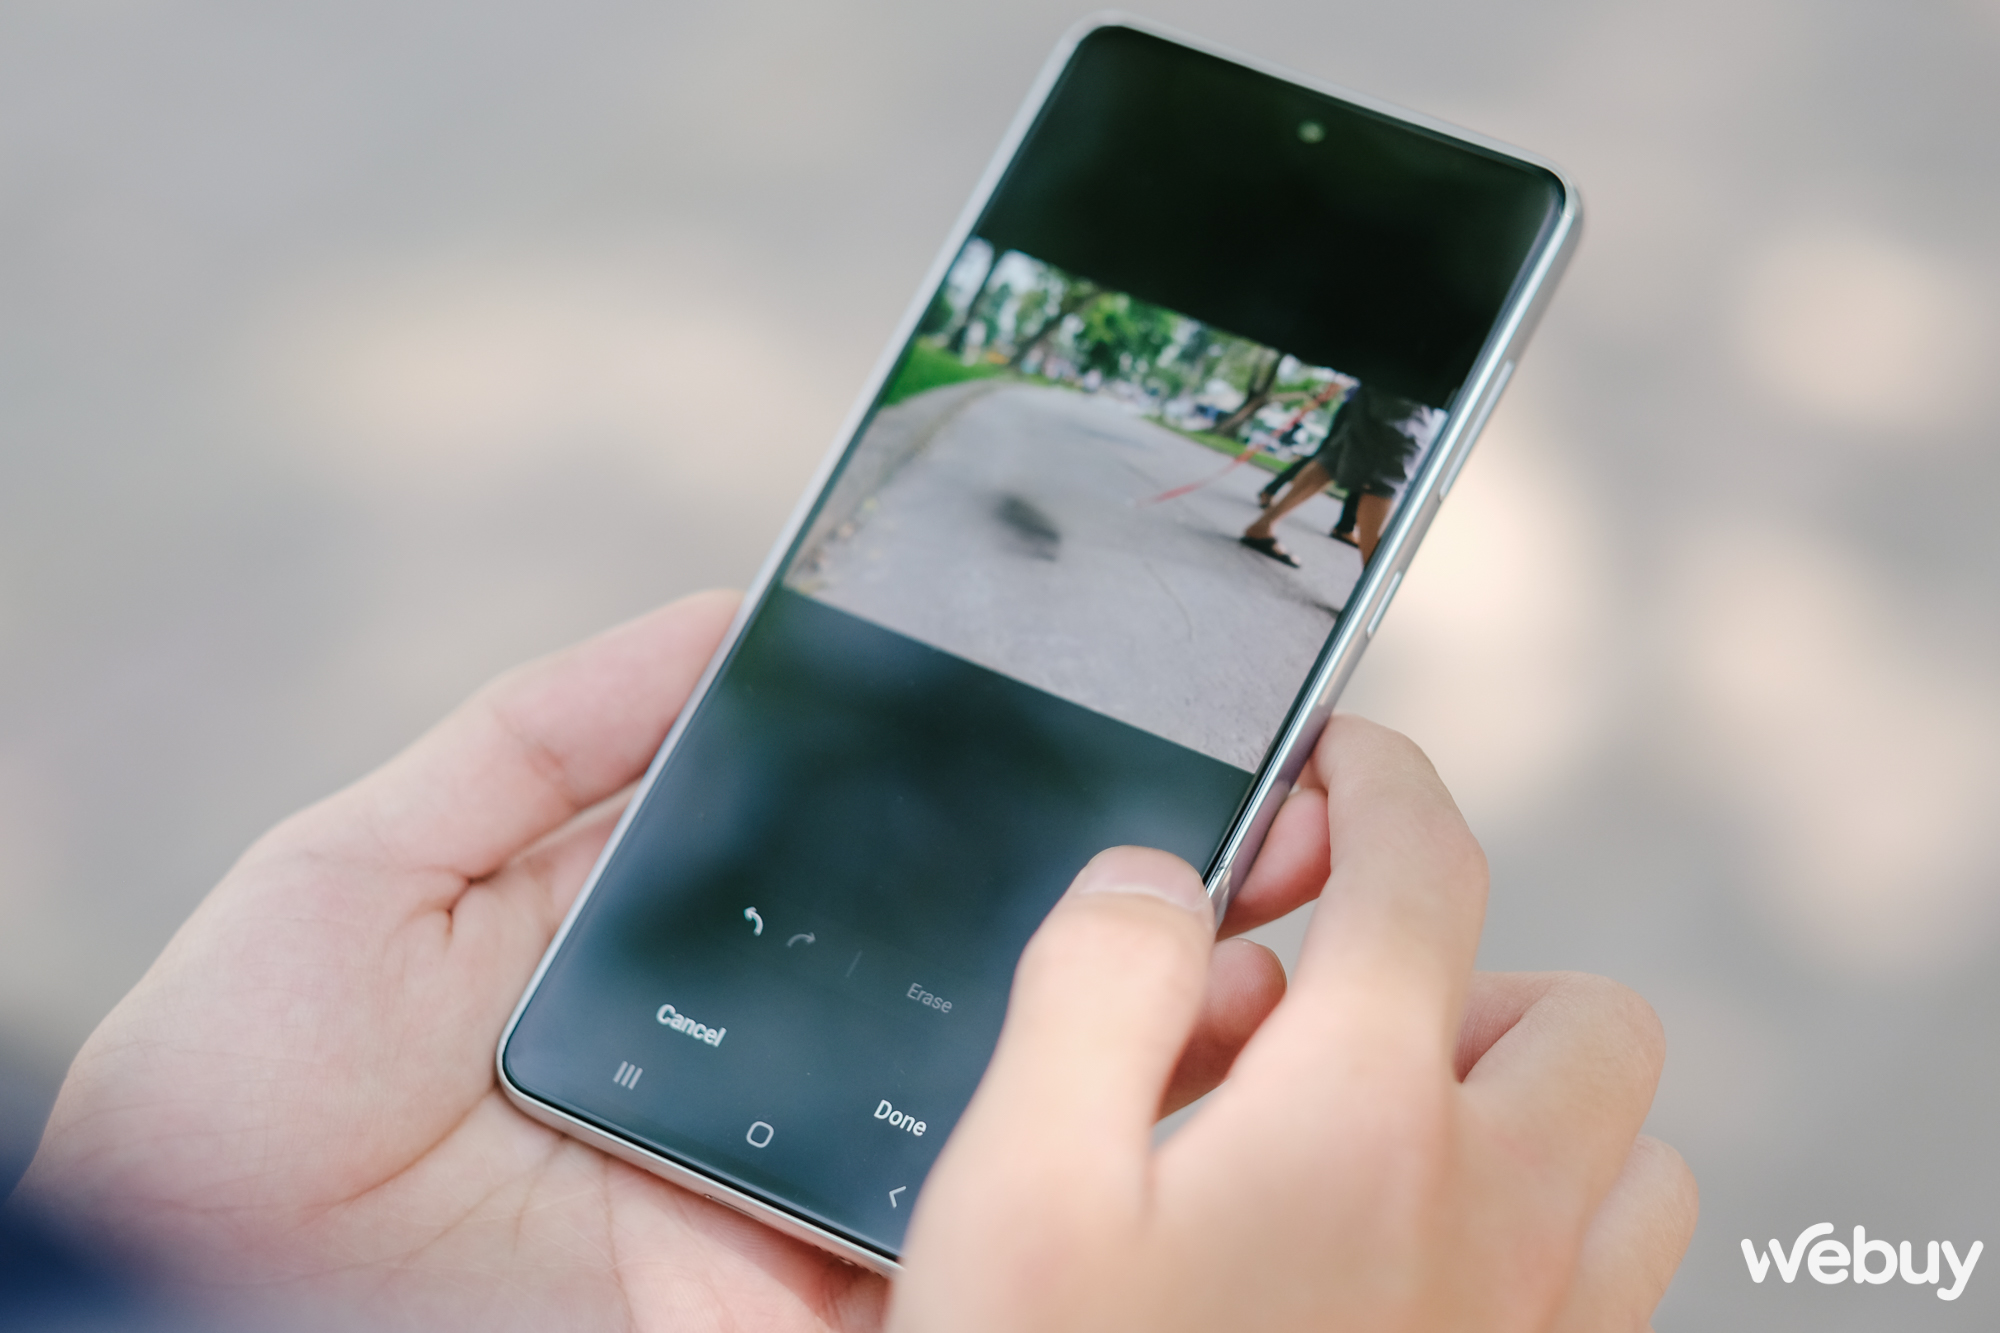 Experience the Remove objects feature of Samsung smartphones: There is 